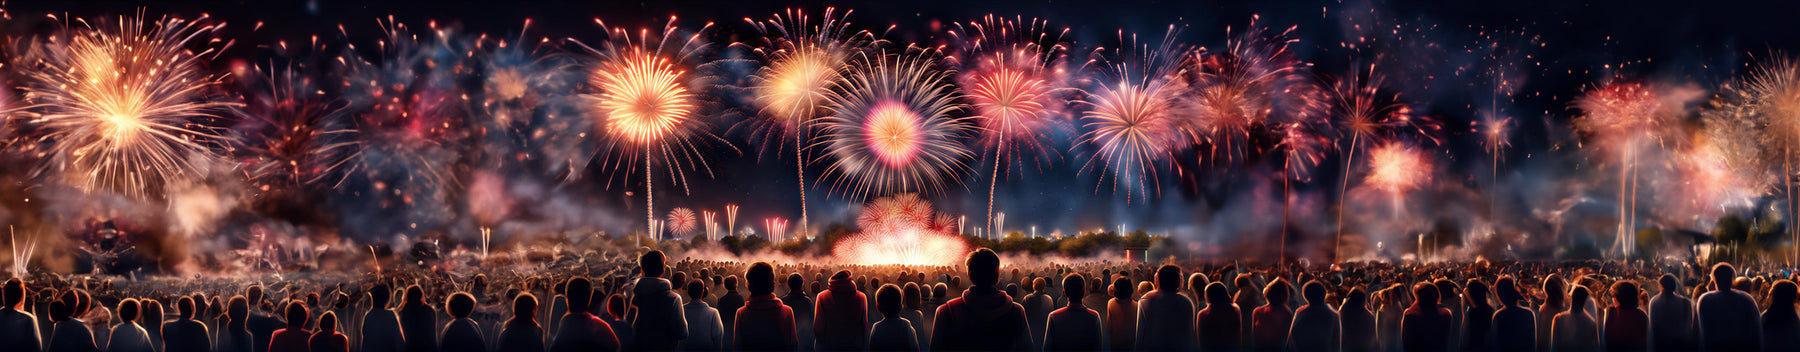 Hettinger Co. Sets World Record with Epic Fireworks Display